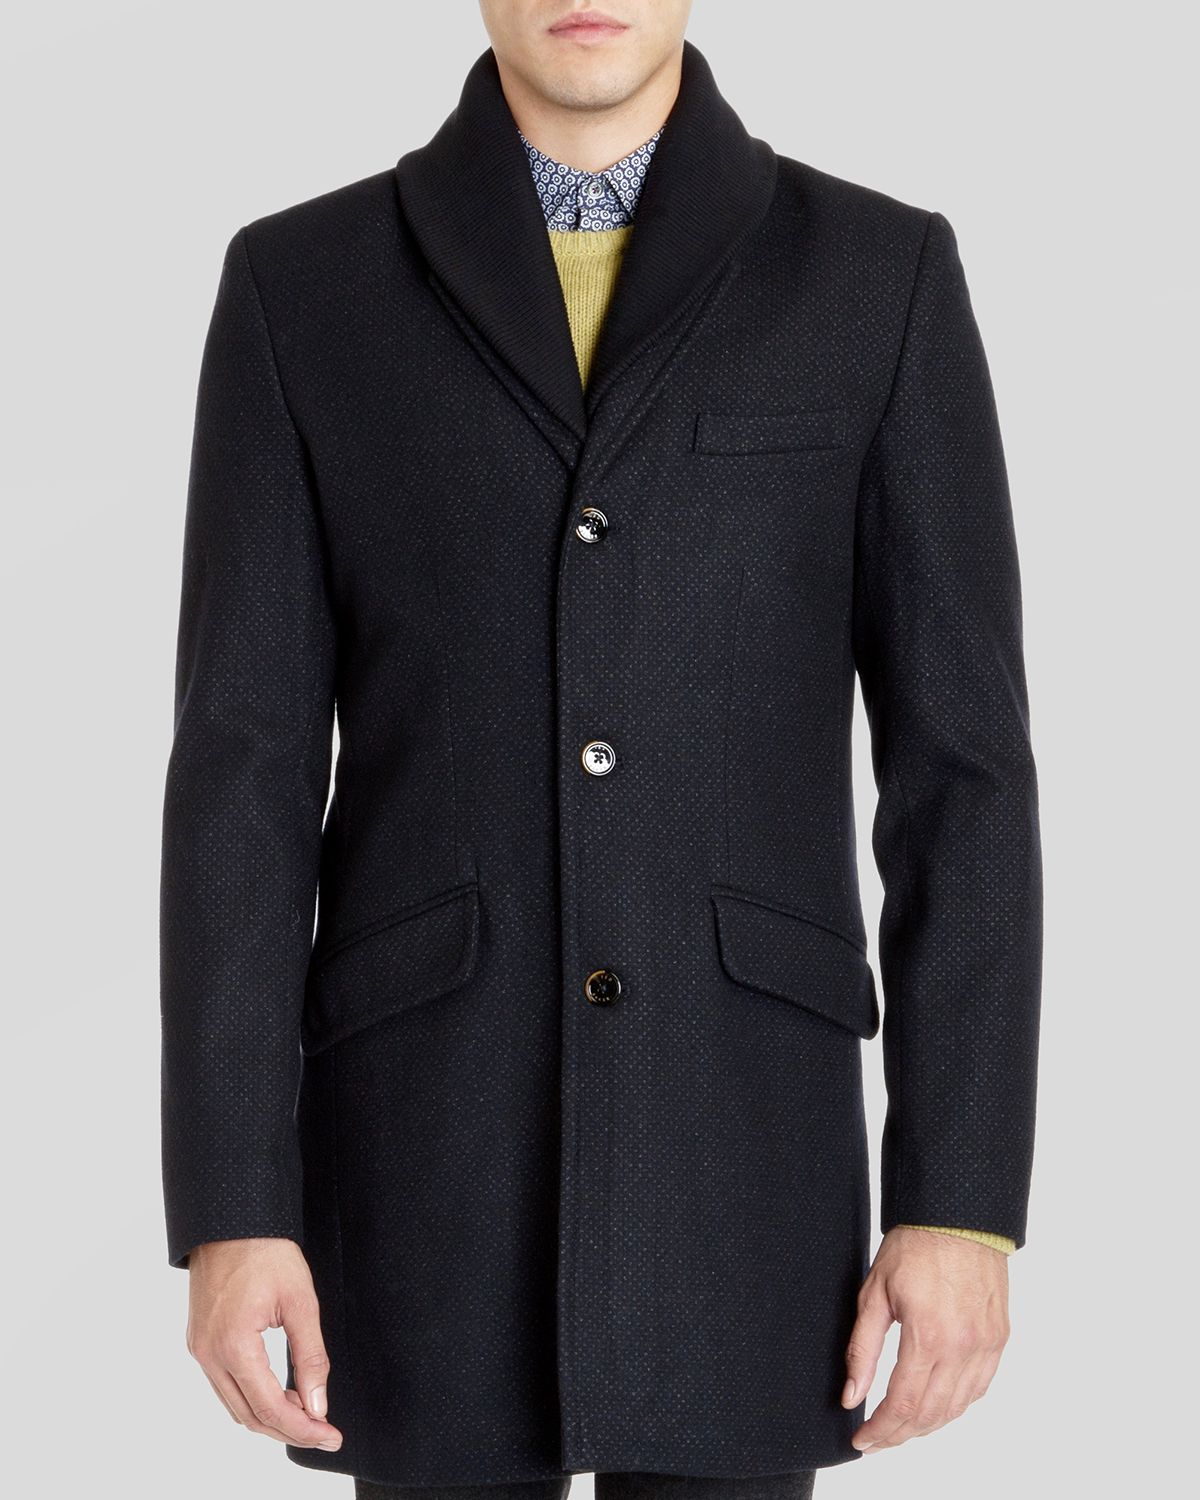 Ted Baker Balon Wool Coat in Charcoal (Gray) for Men - Lyst